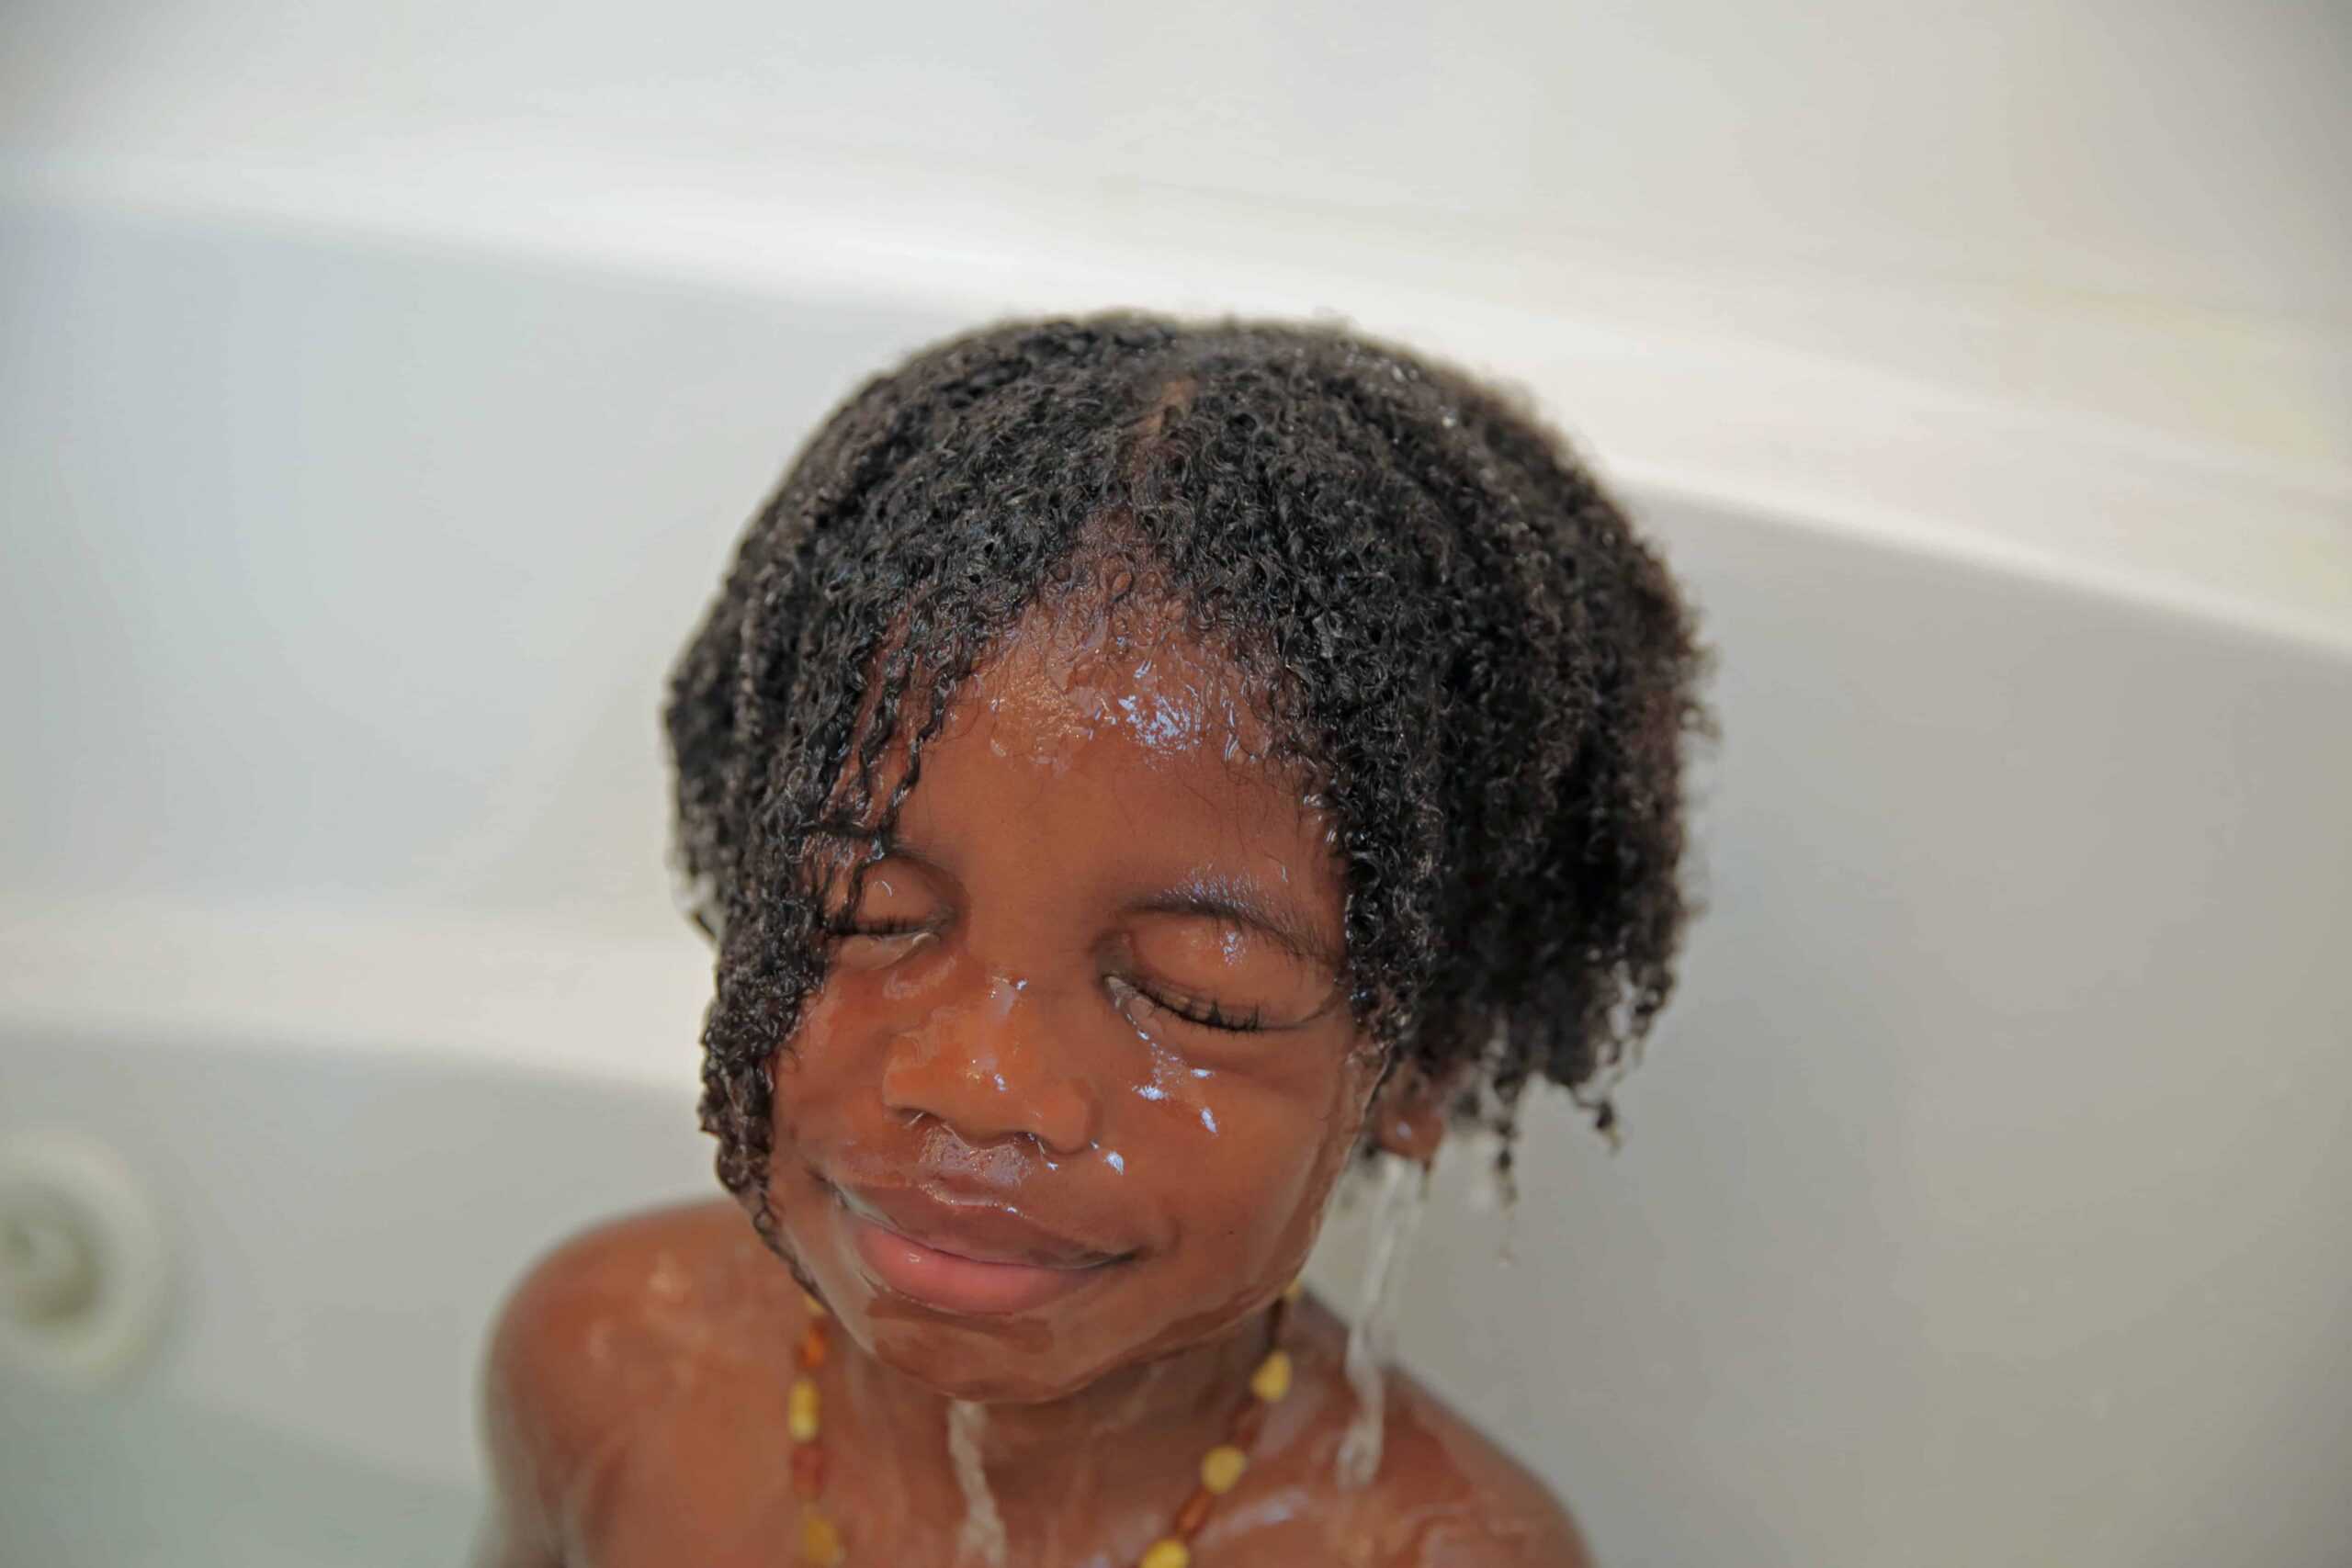 4 Ways to Install Beads!  Kids Natural Hair Care 